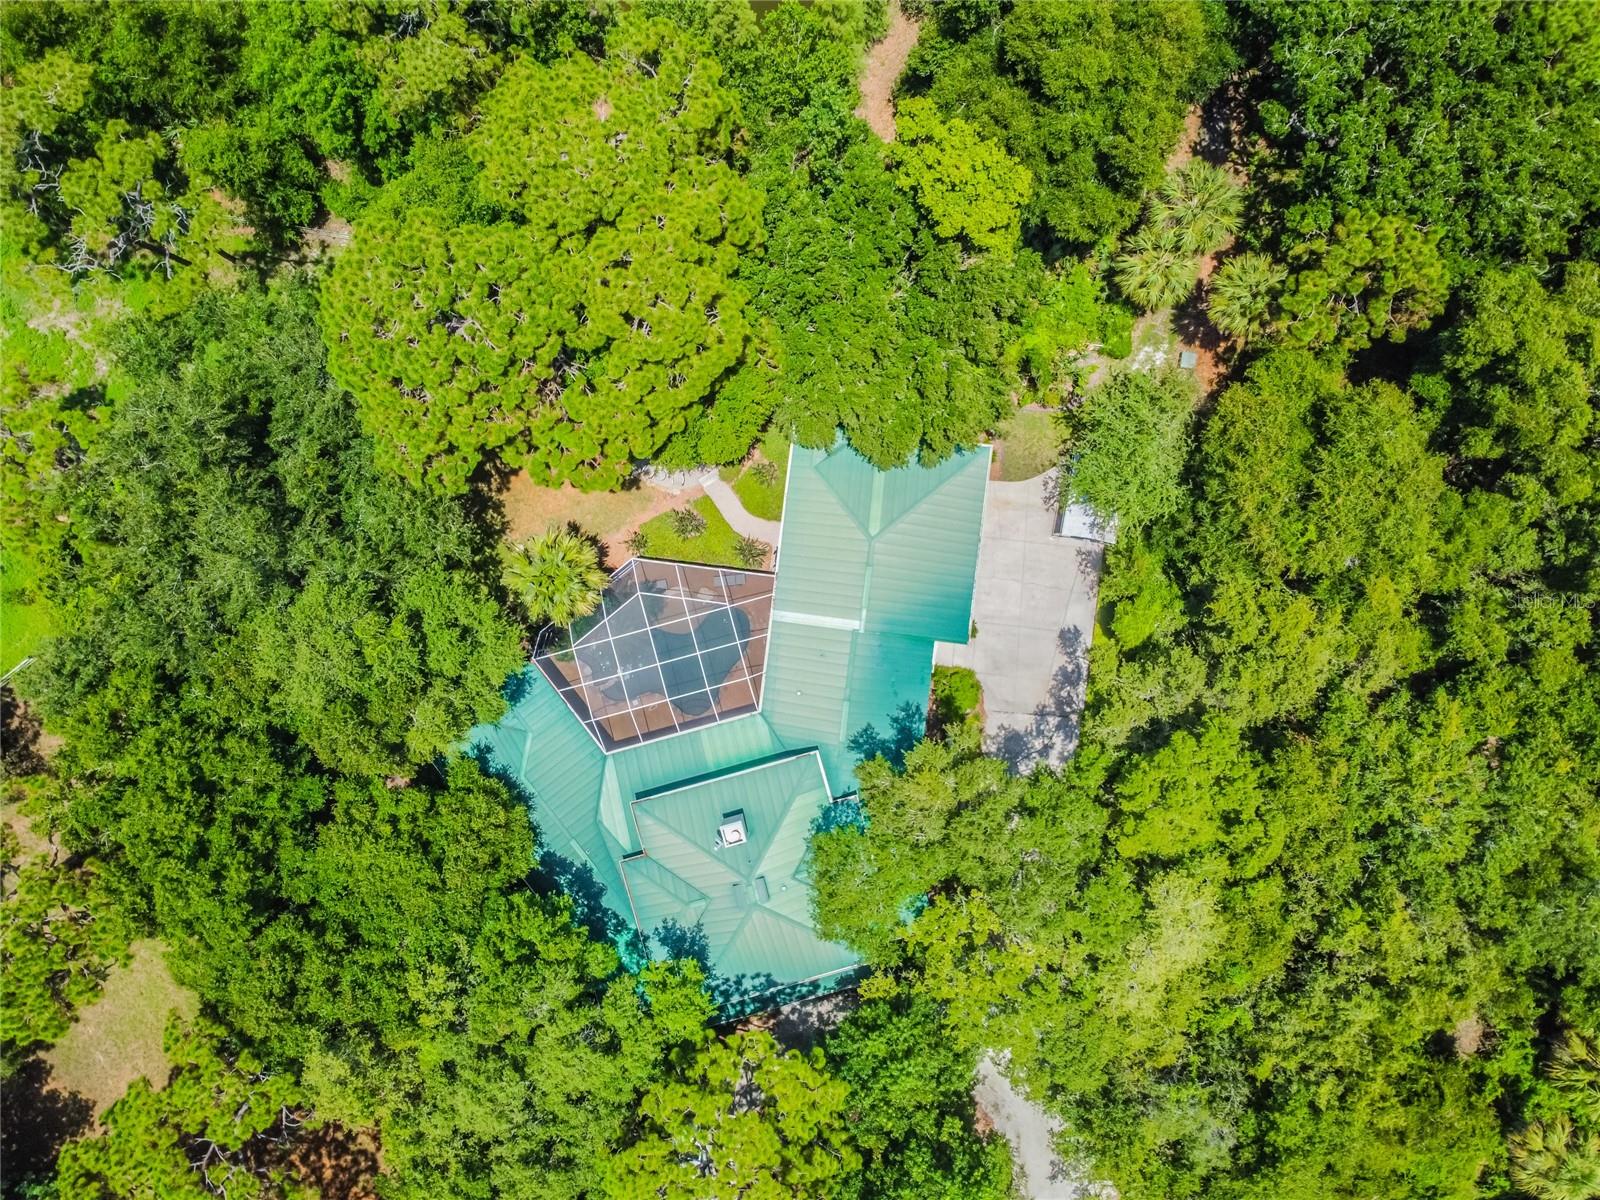 Aerial view of house and lot.